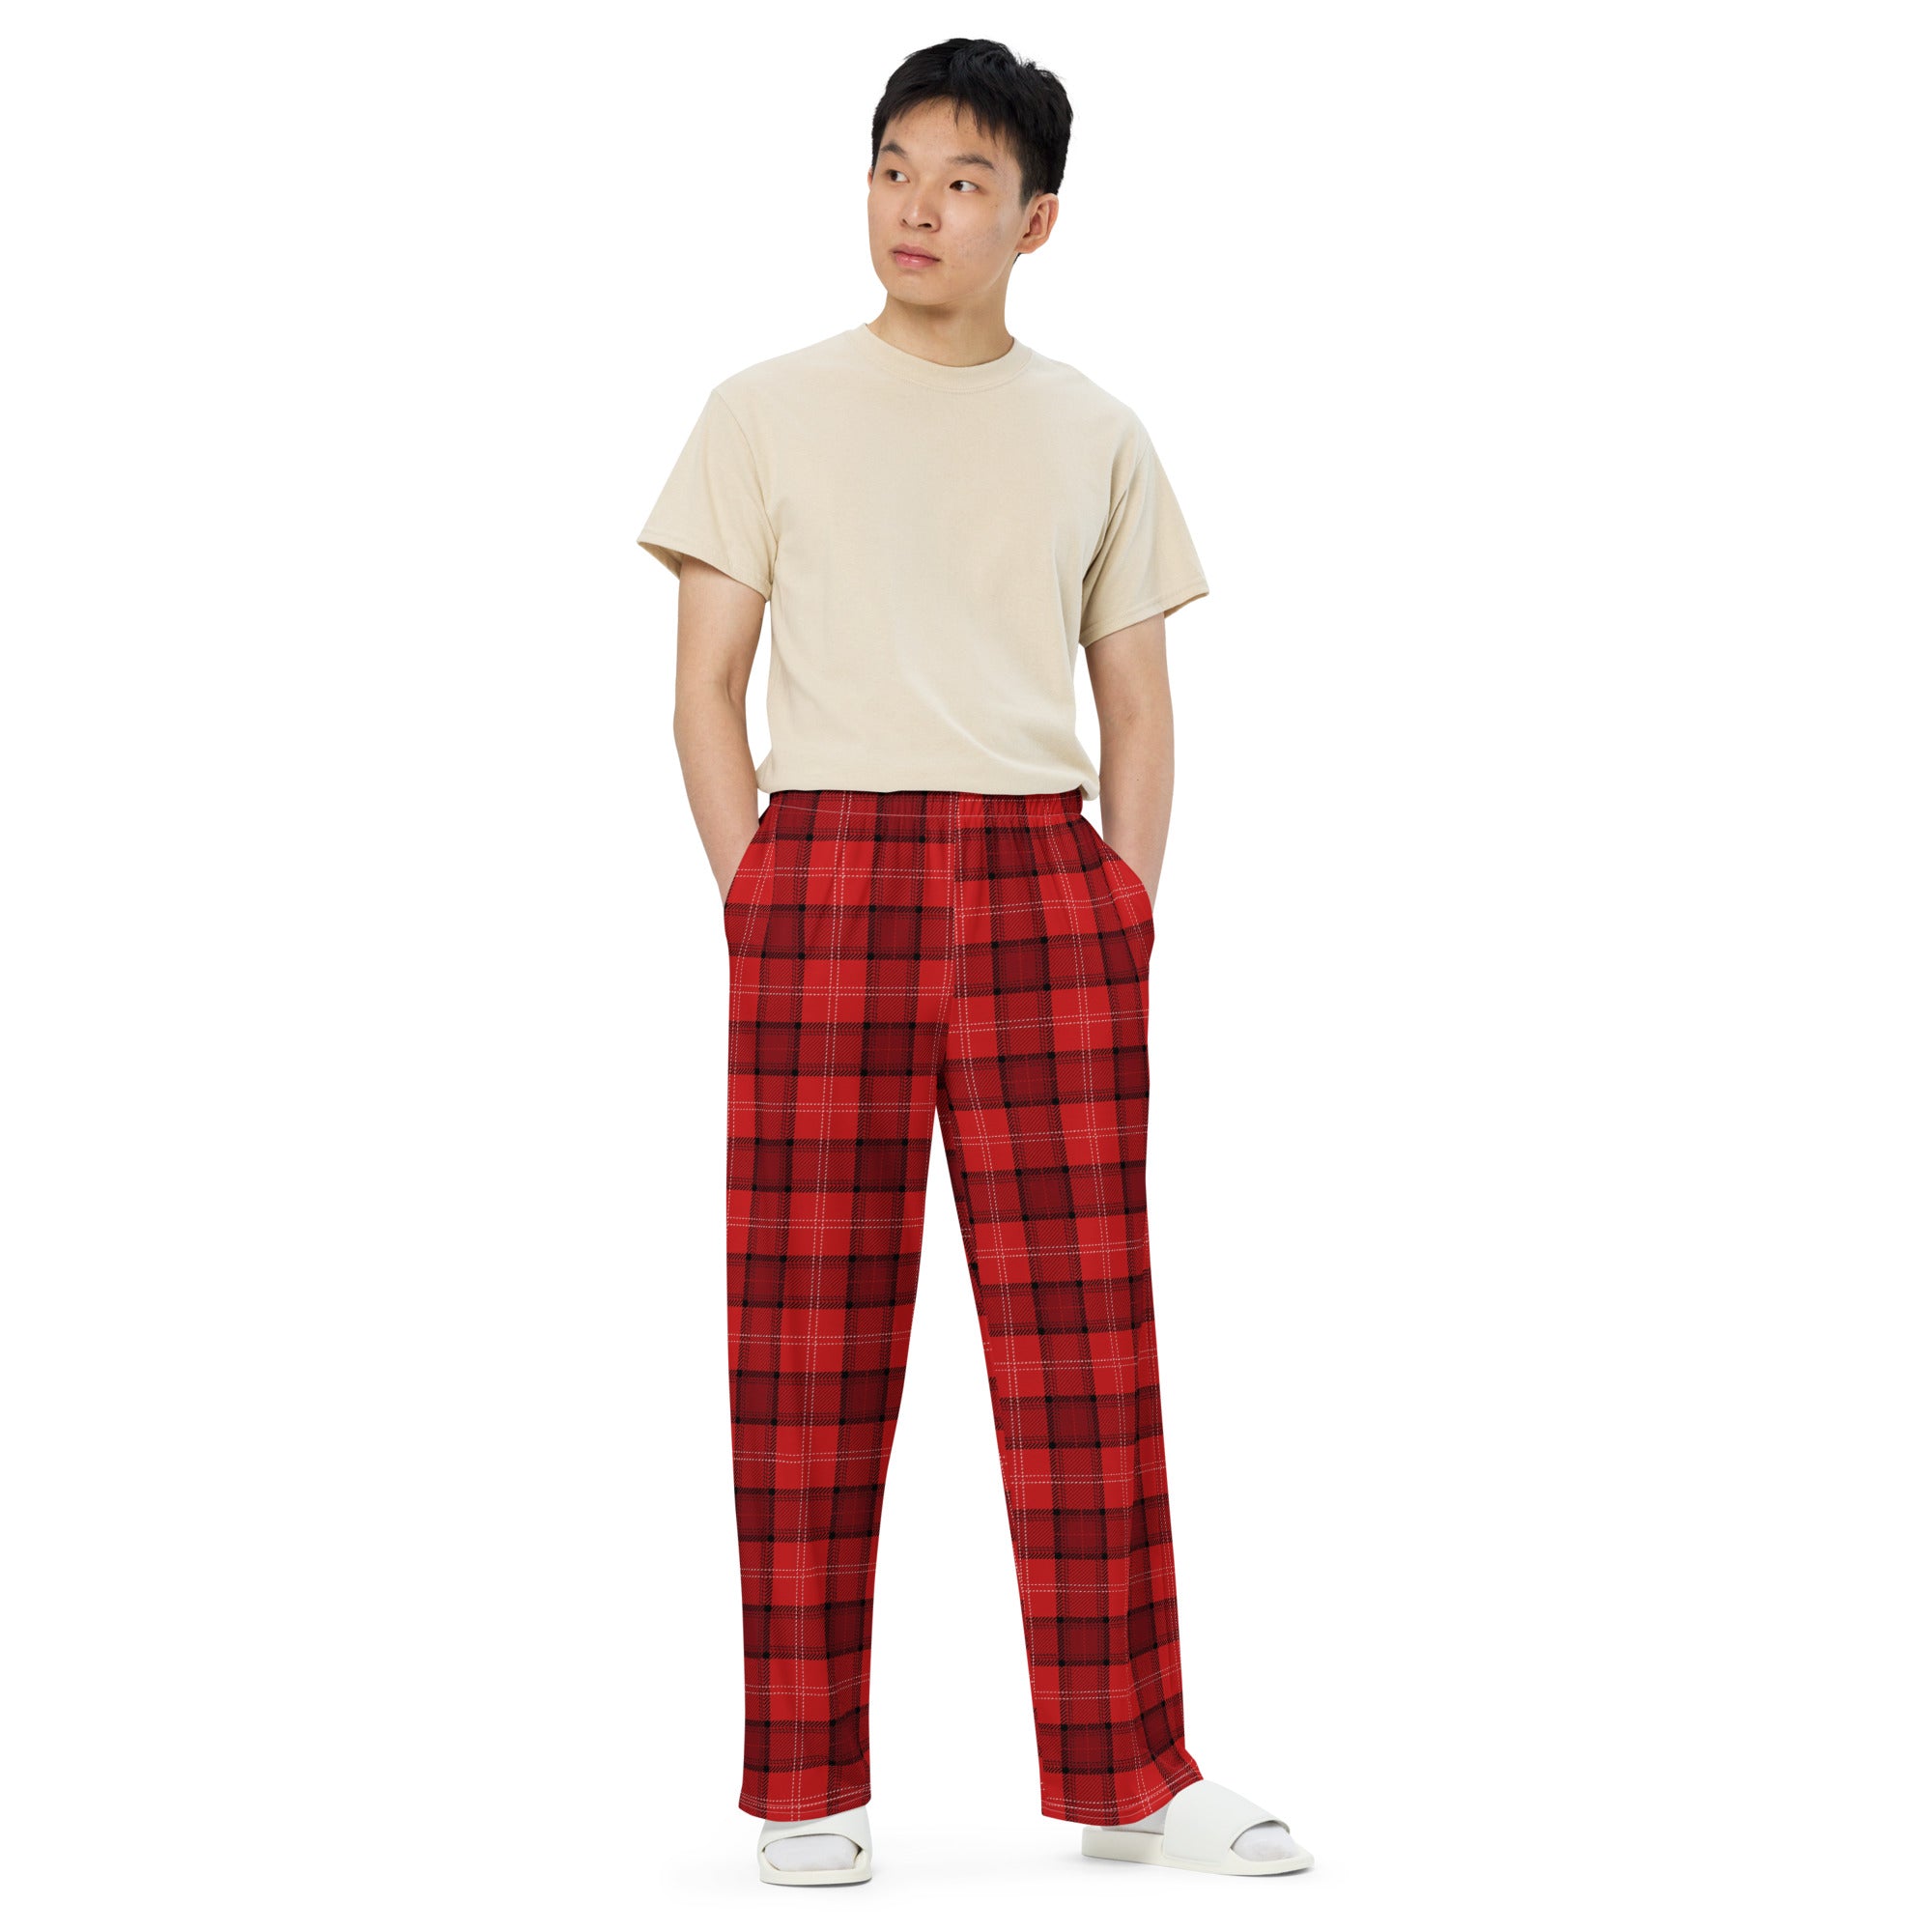 Loose-Fit Lounge Pants - Red Plaid